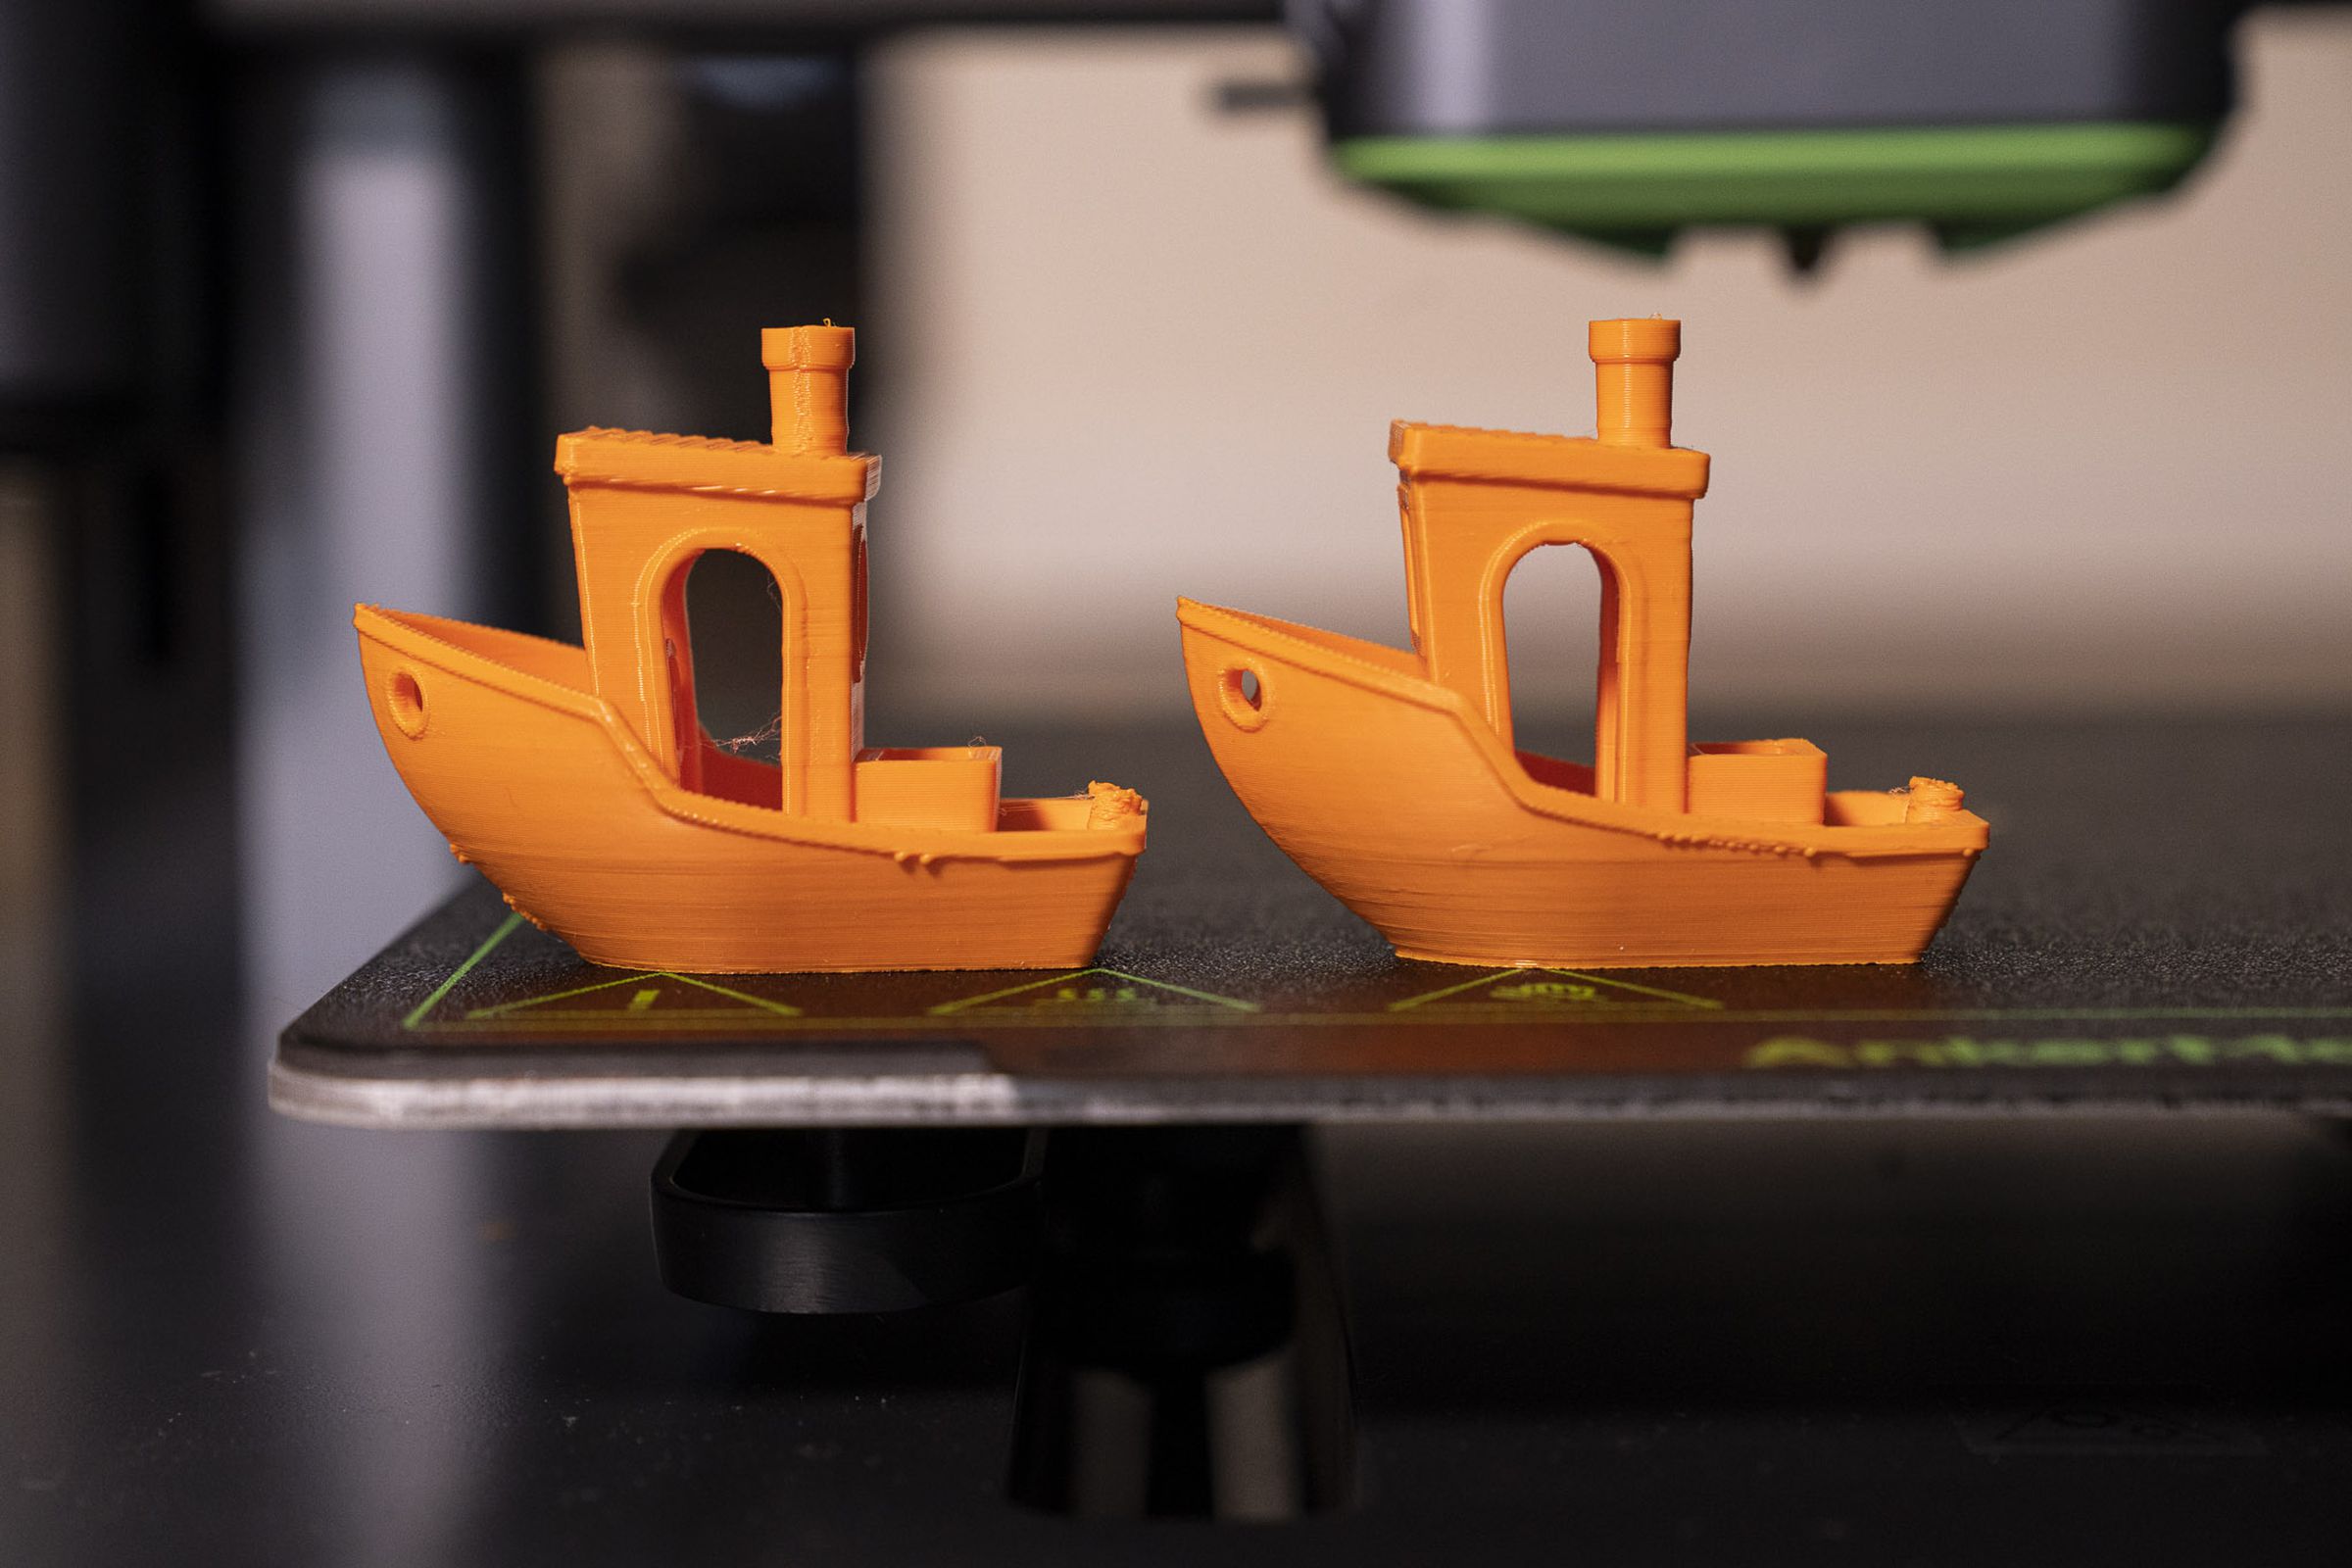 My Benchy, before and after the March update. The zits on the ship’s bow are gone, but not the ringing.